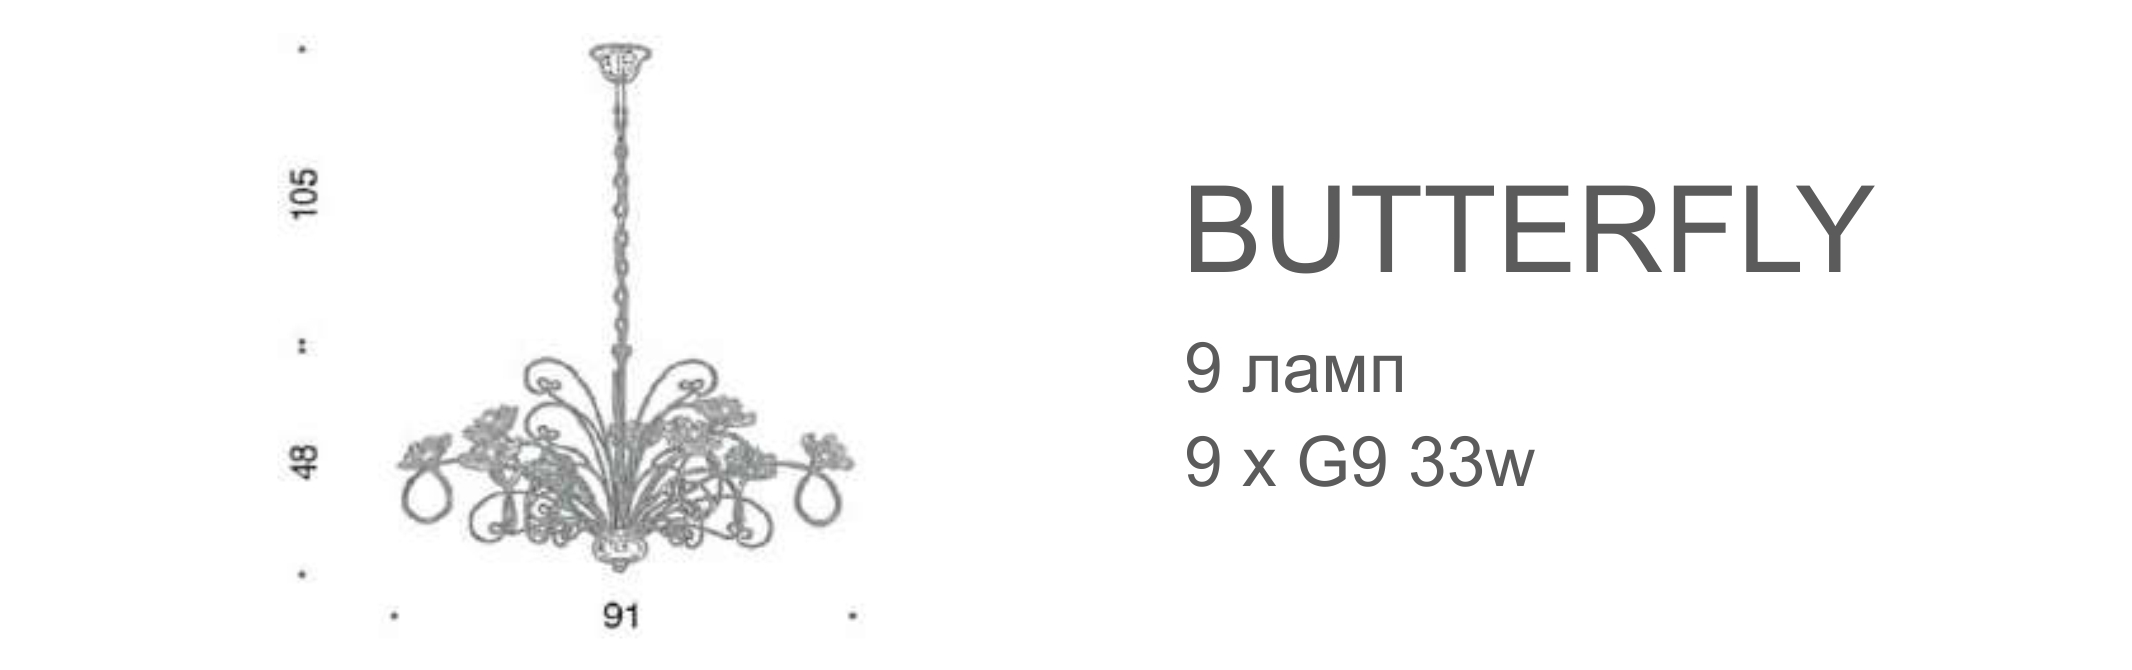 Люстра Butterfly - 9 ламп